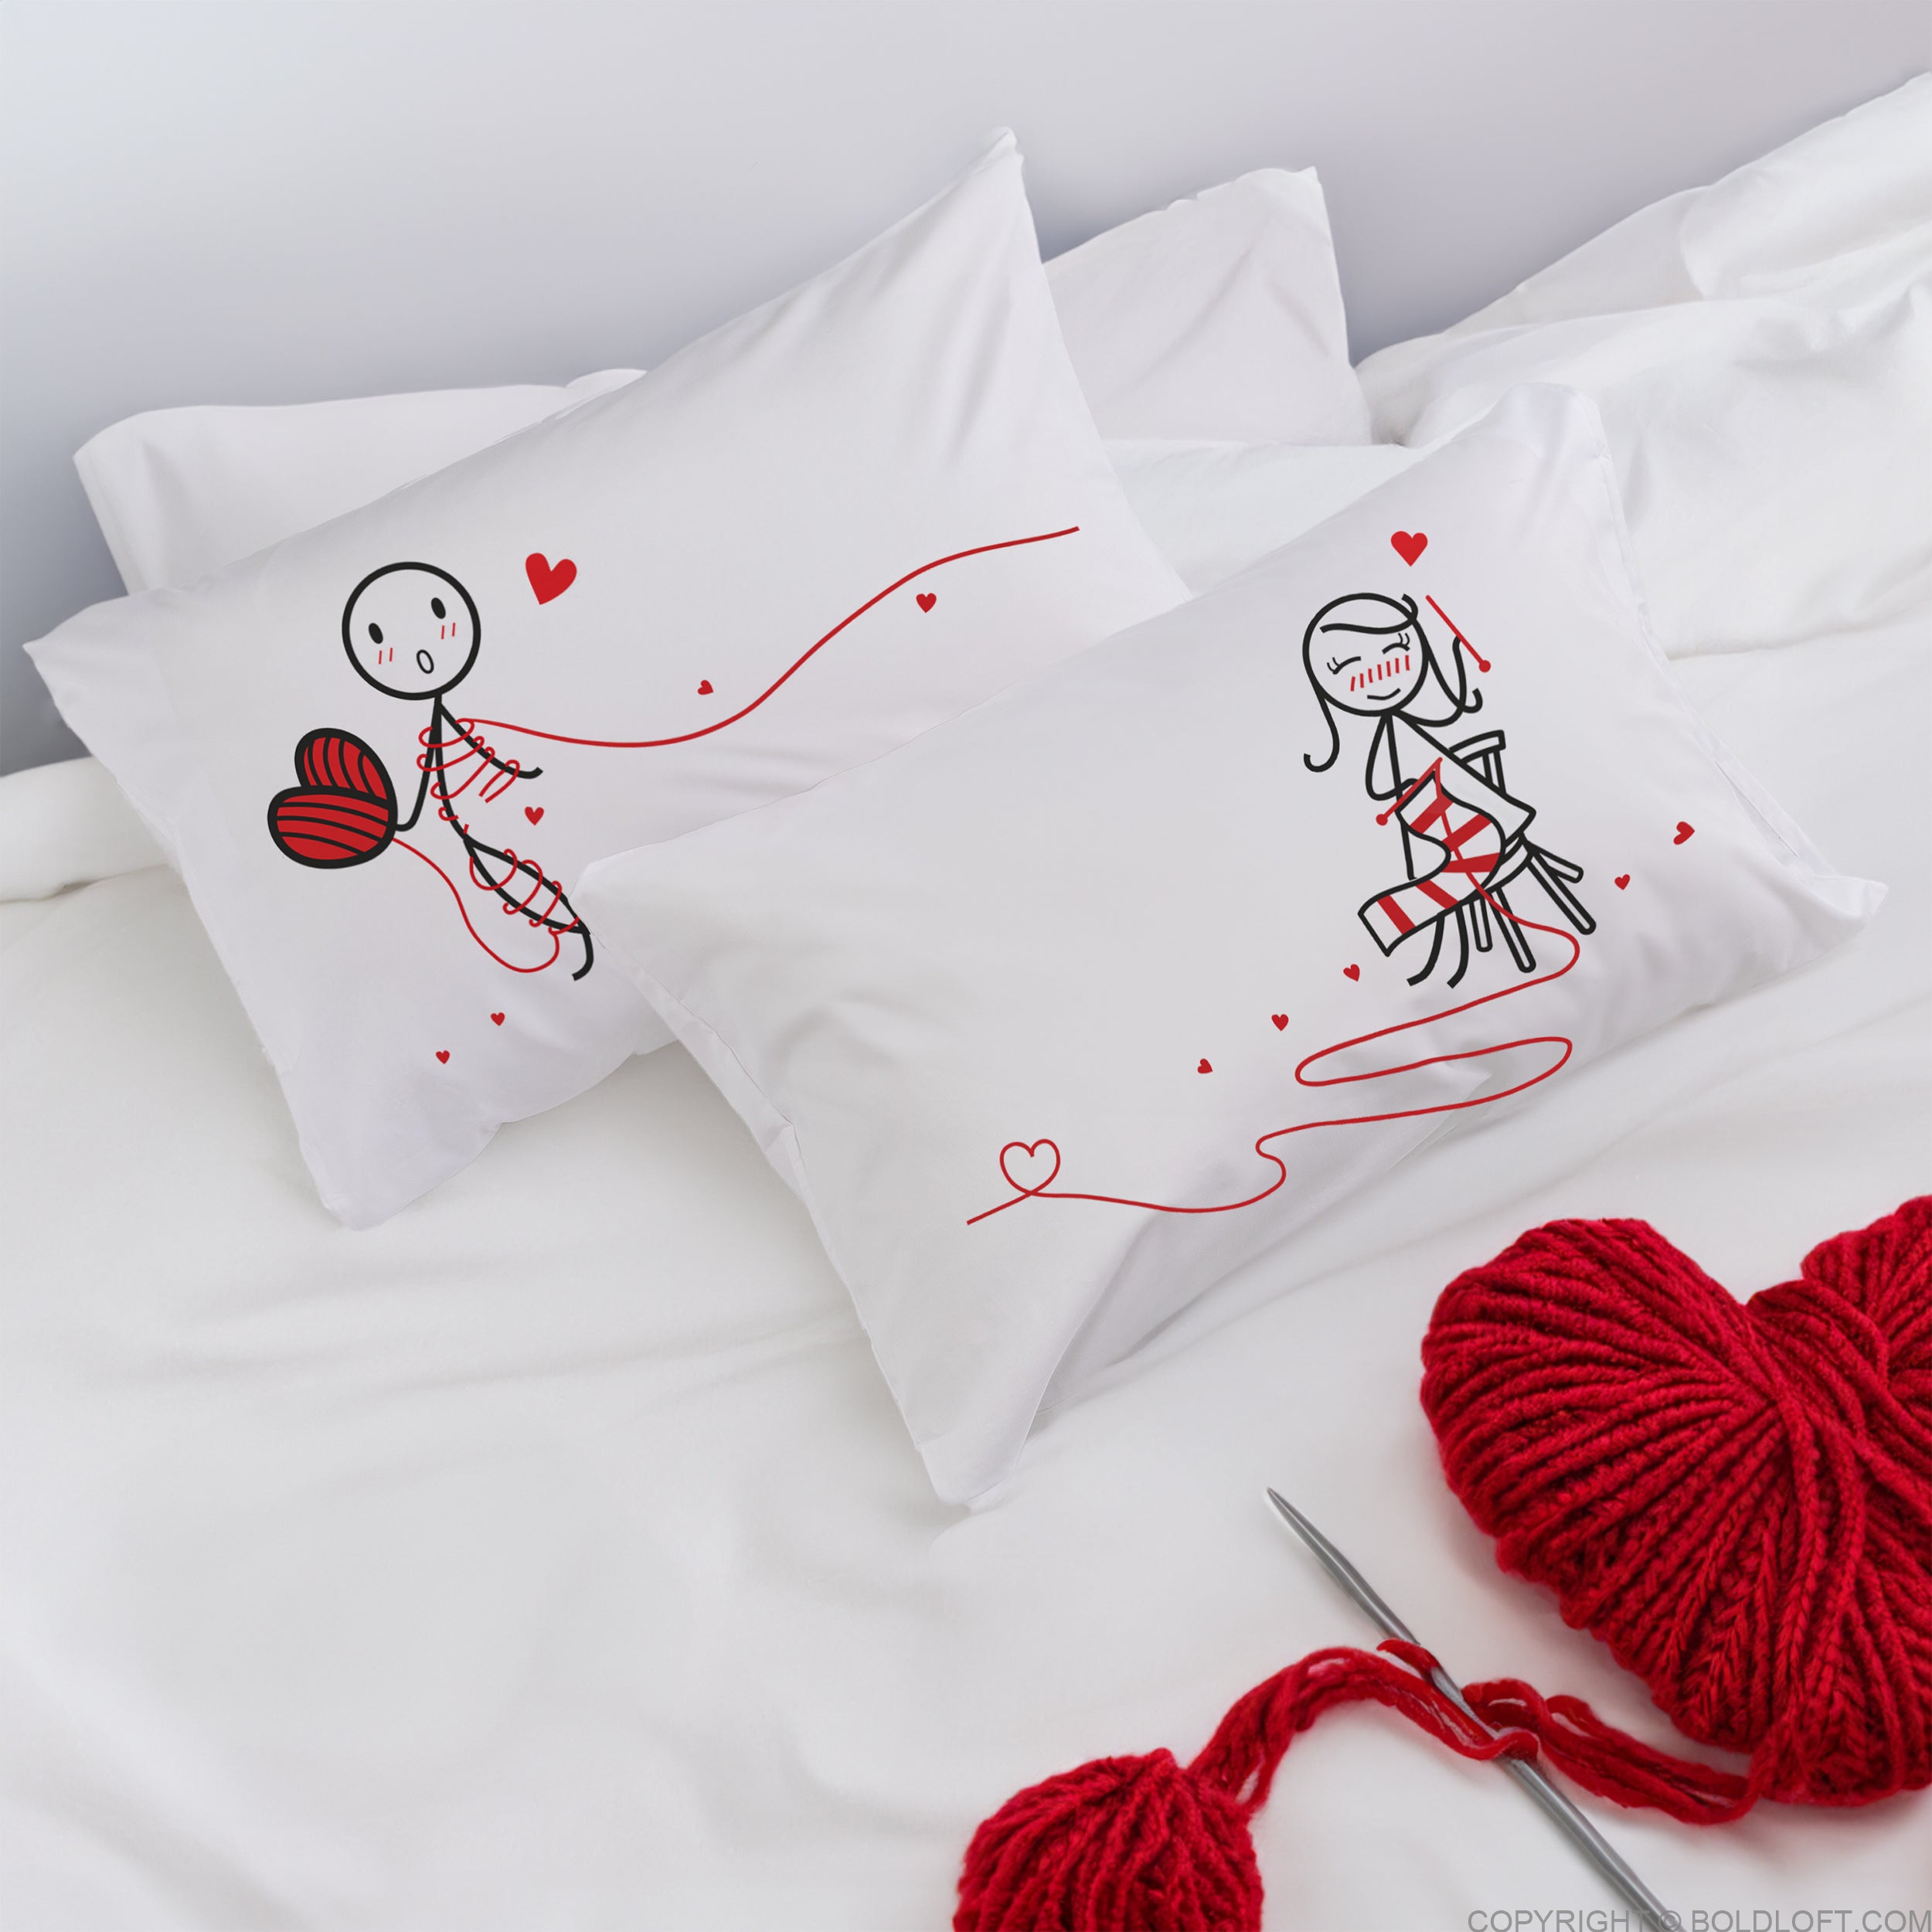 BoldLoft Love Ties Us Together Couple Pillowcases features a girl and a boy stick figures and a love theme 